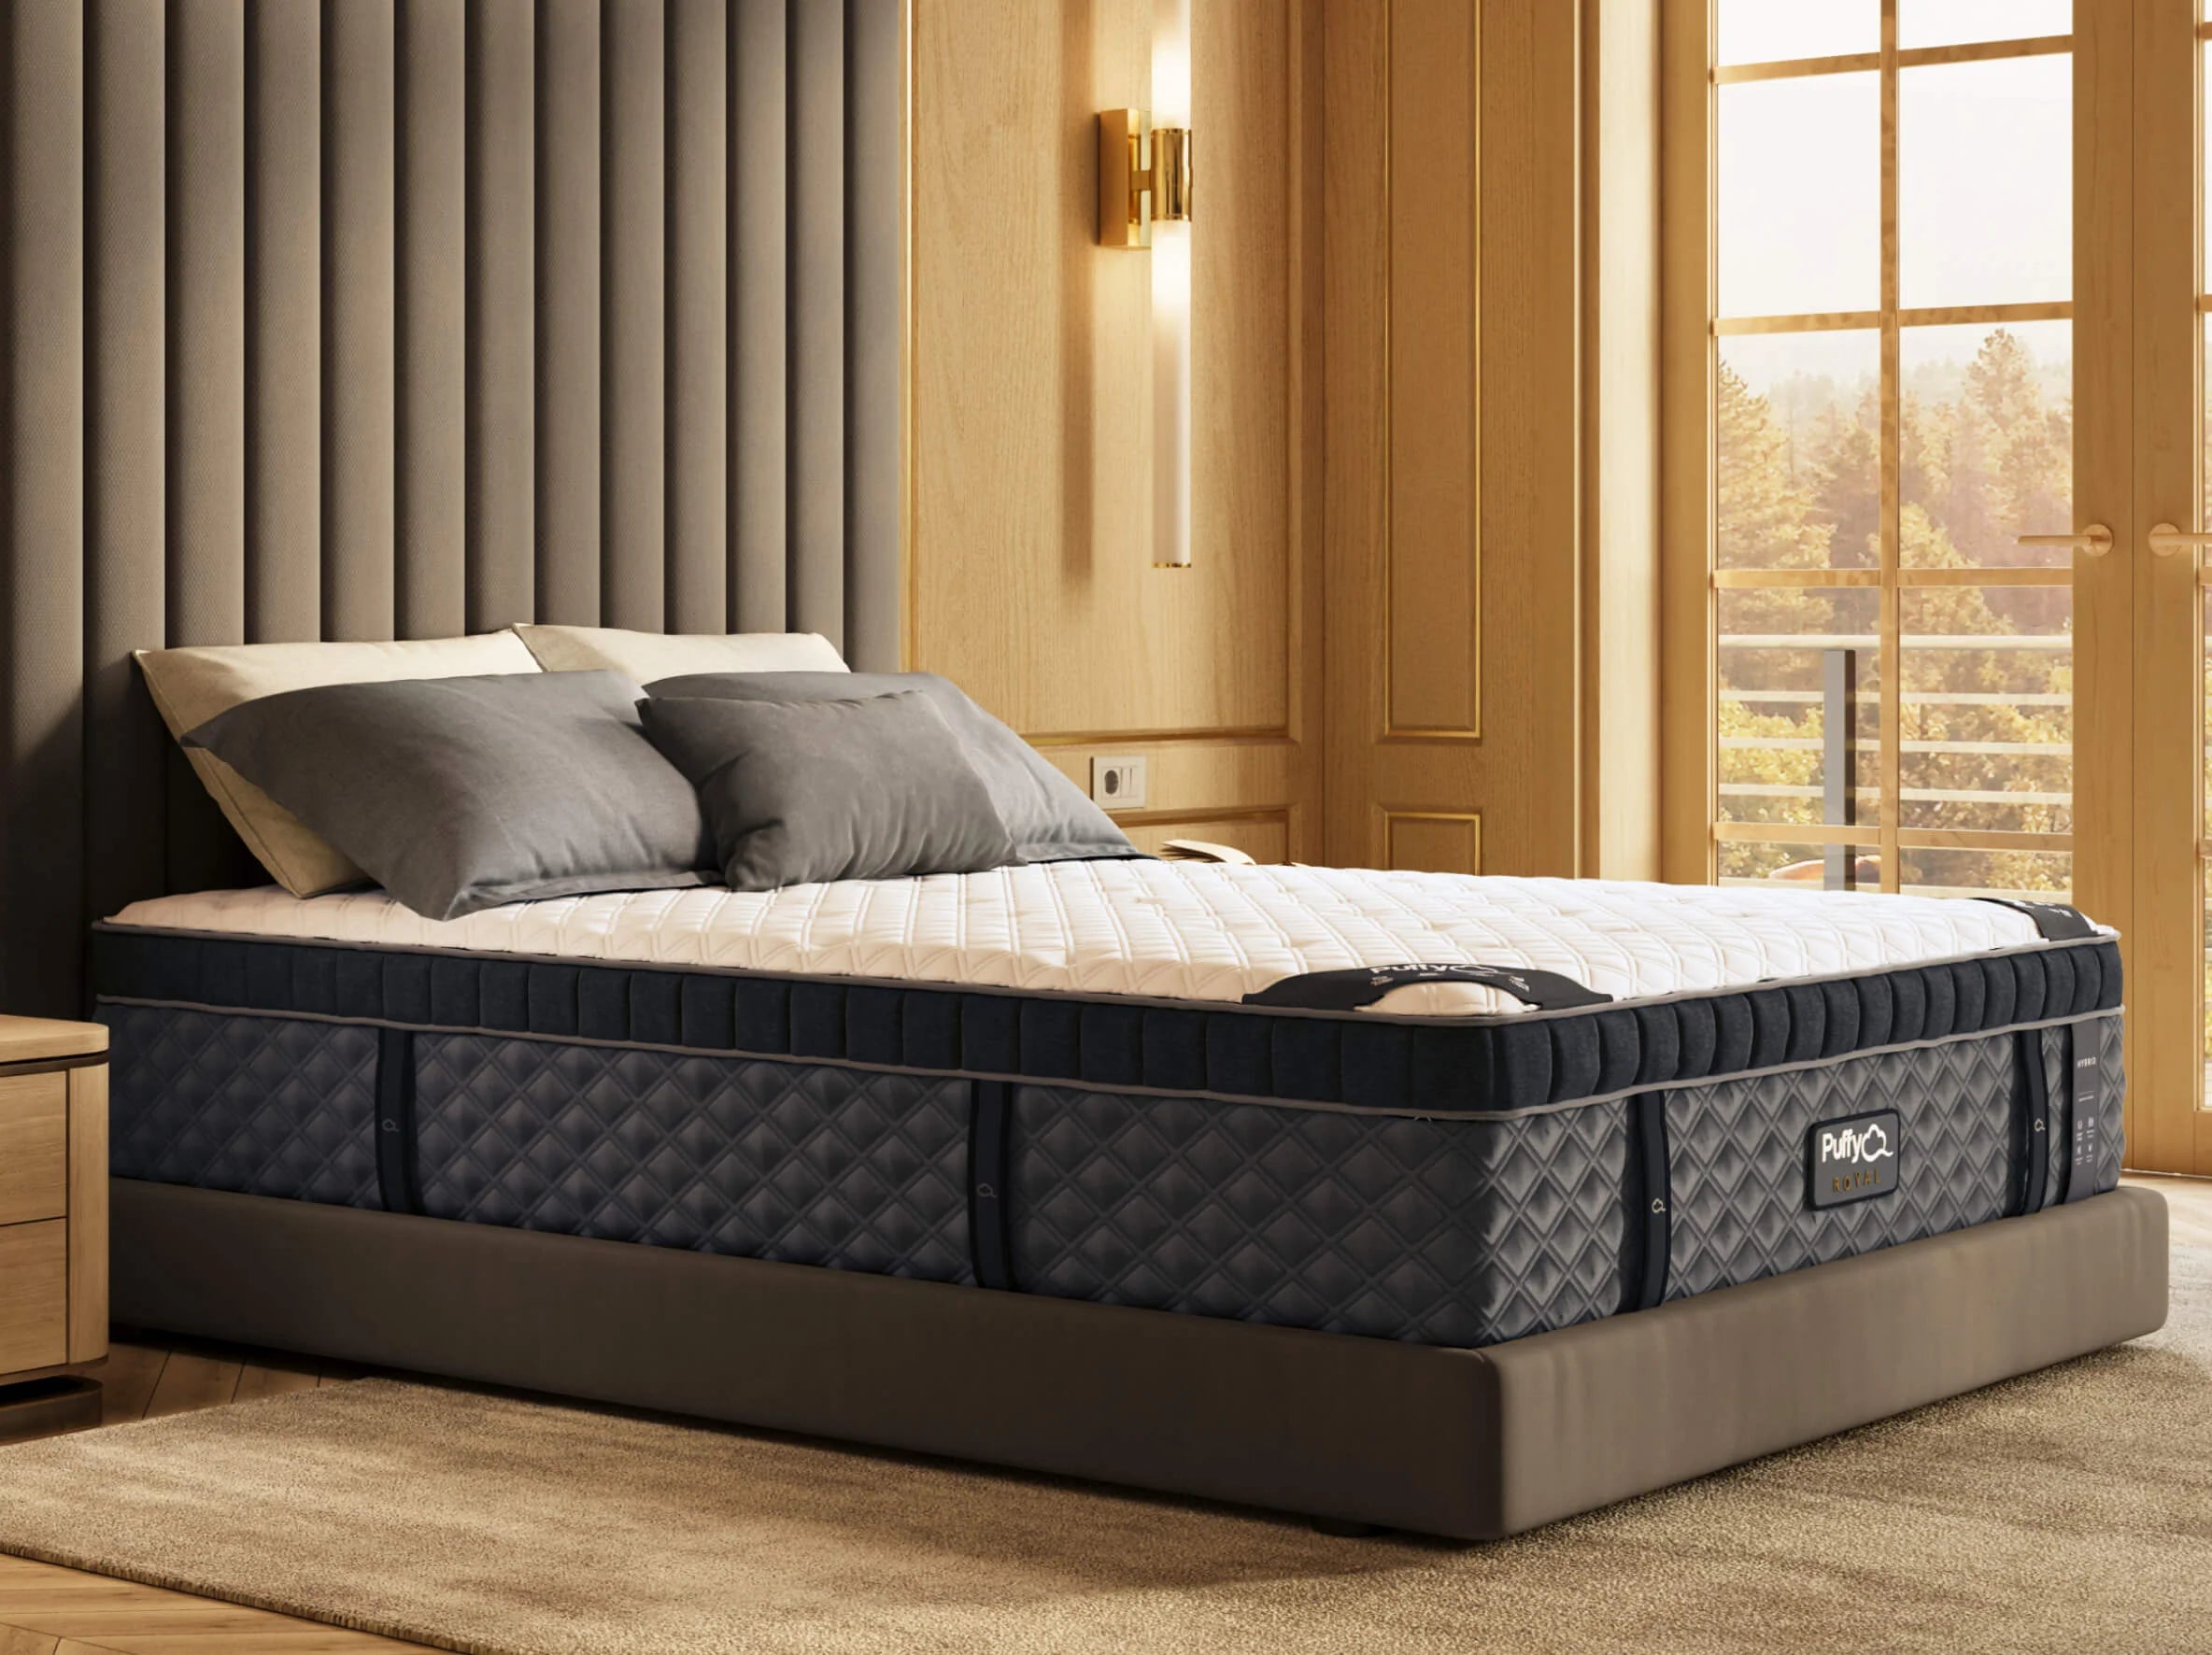 Plush Mattress in a Box: The Rise of Comfort